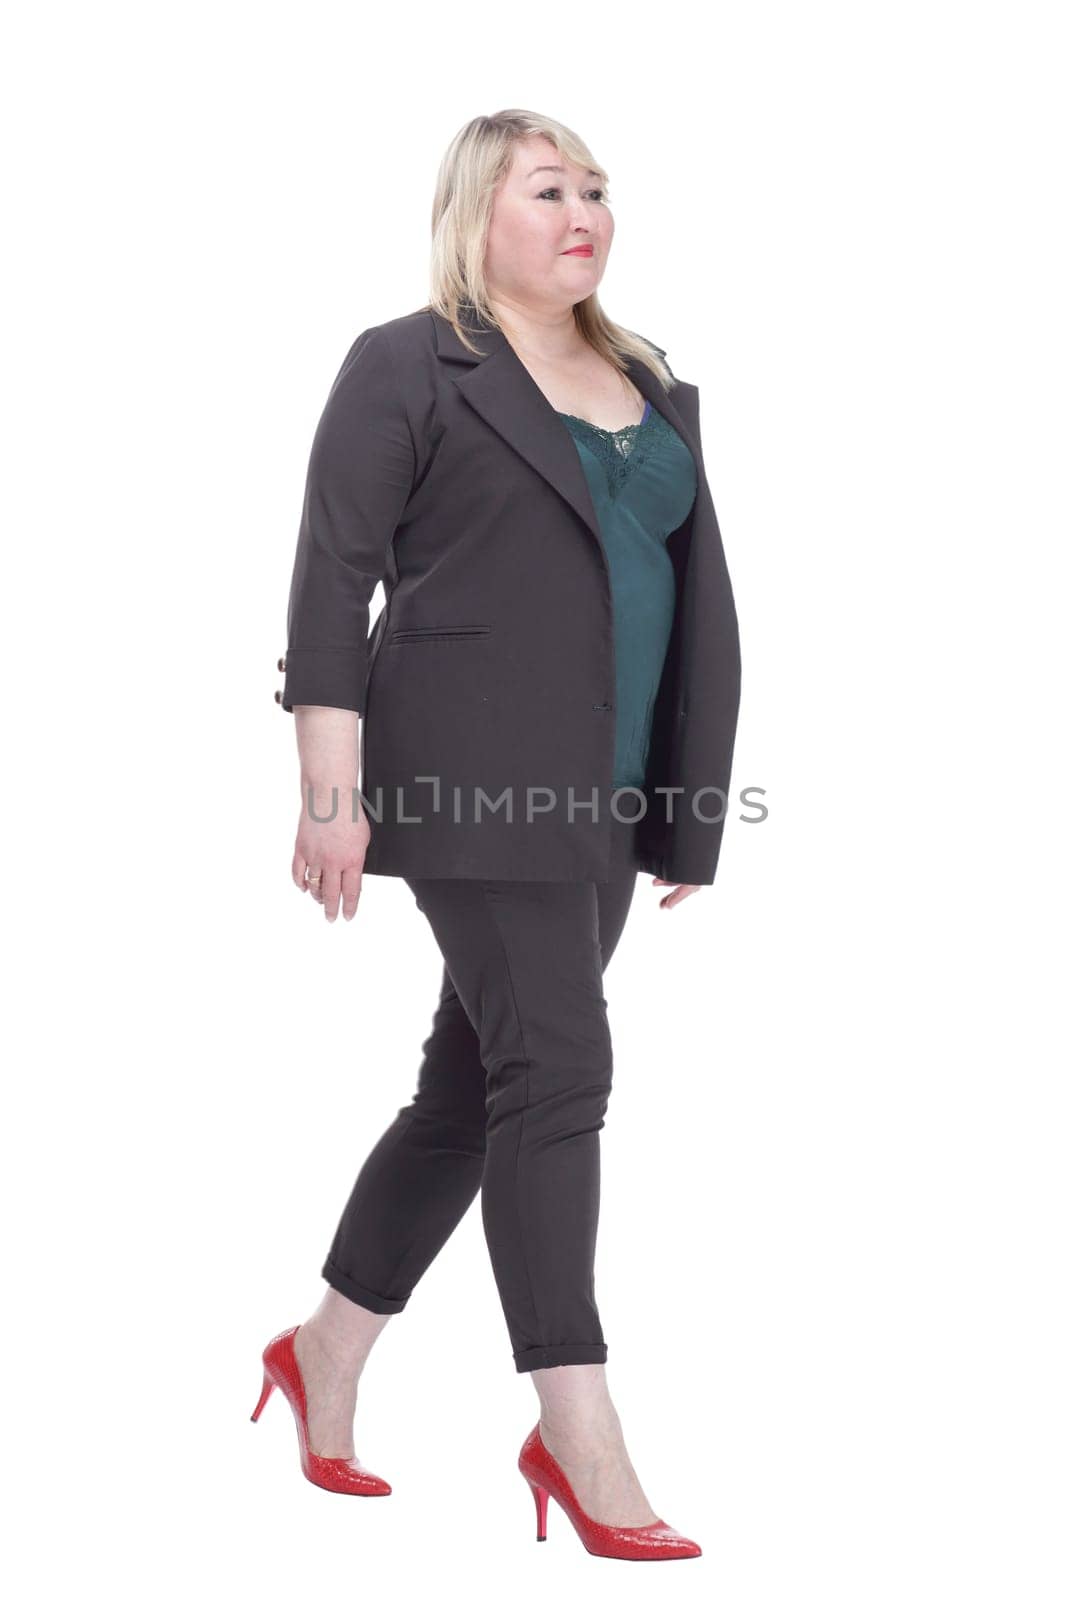 in full growth. smiling woman in a summer pantsuit striding forward. isolated on a white background.